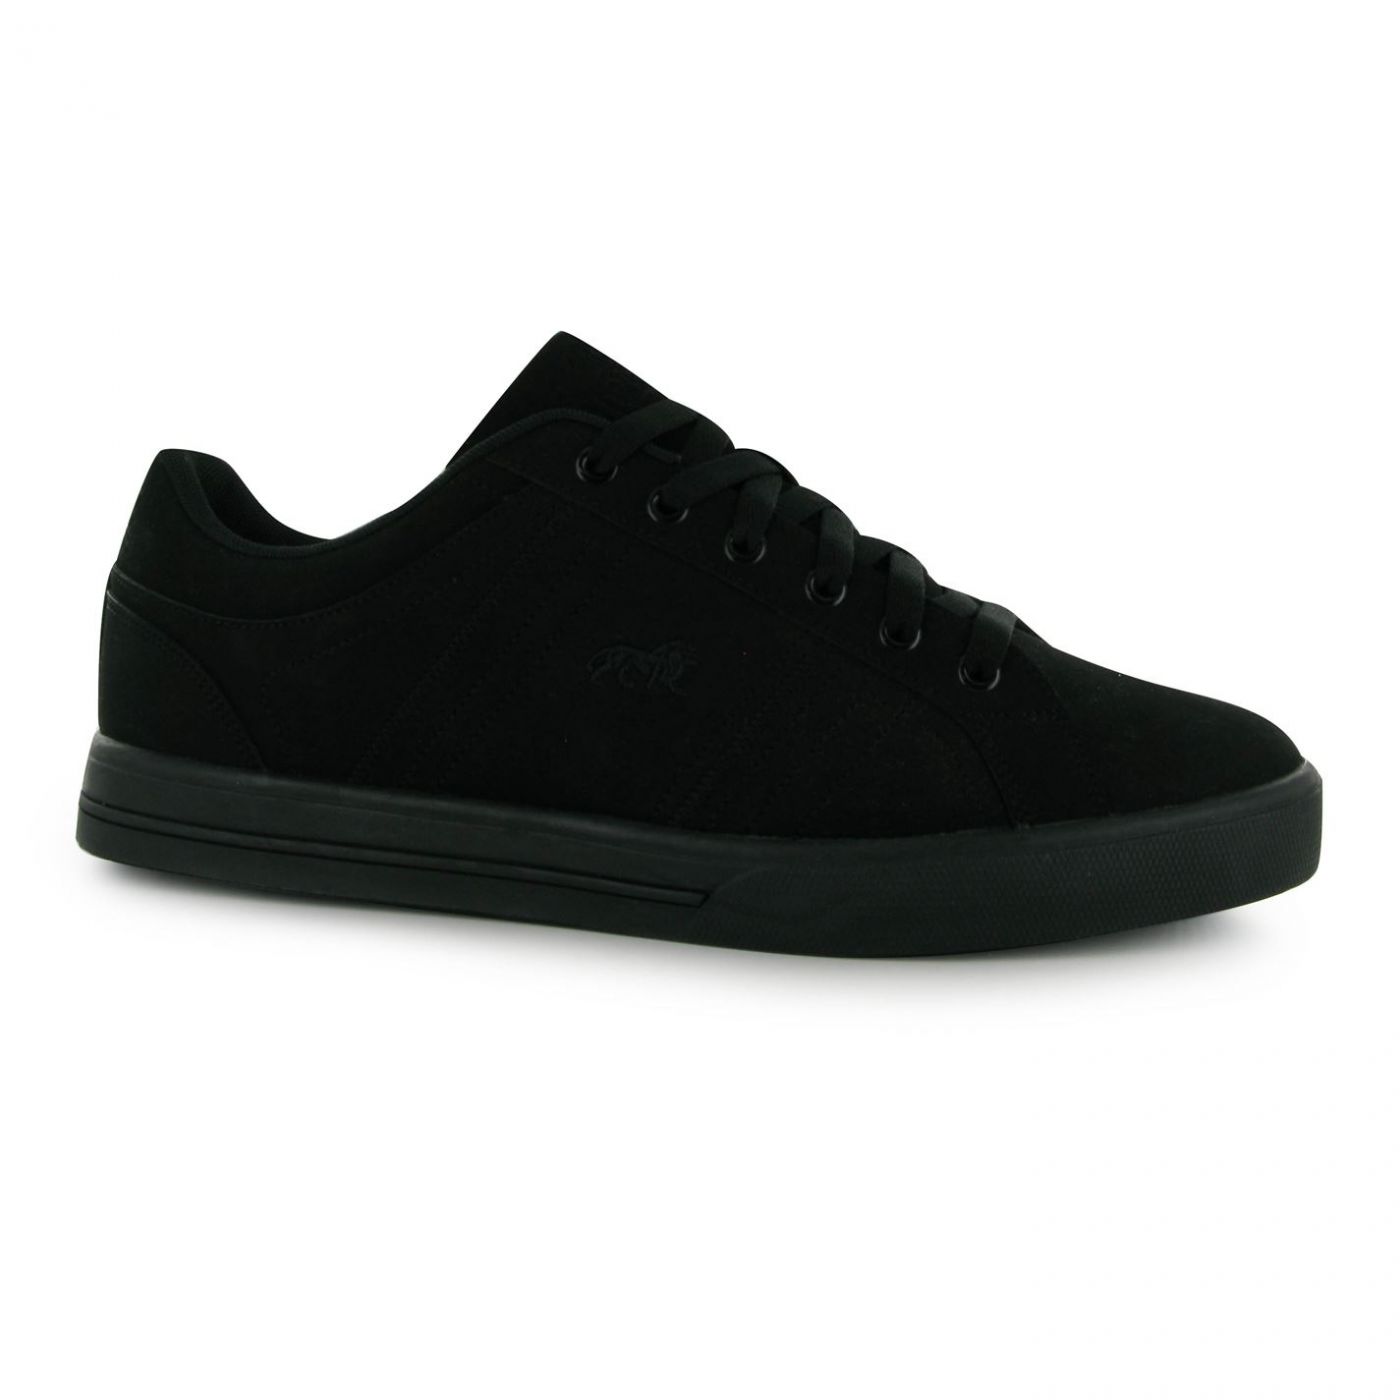 lonsdale latimer mens trainers